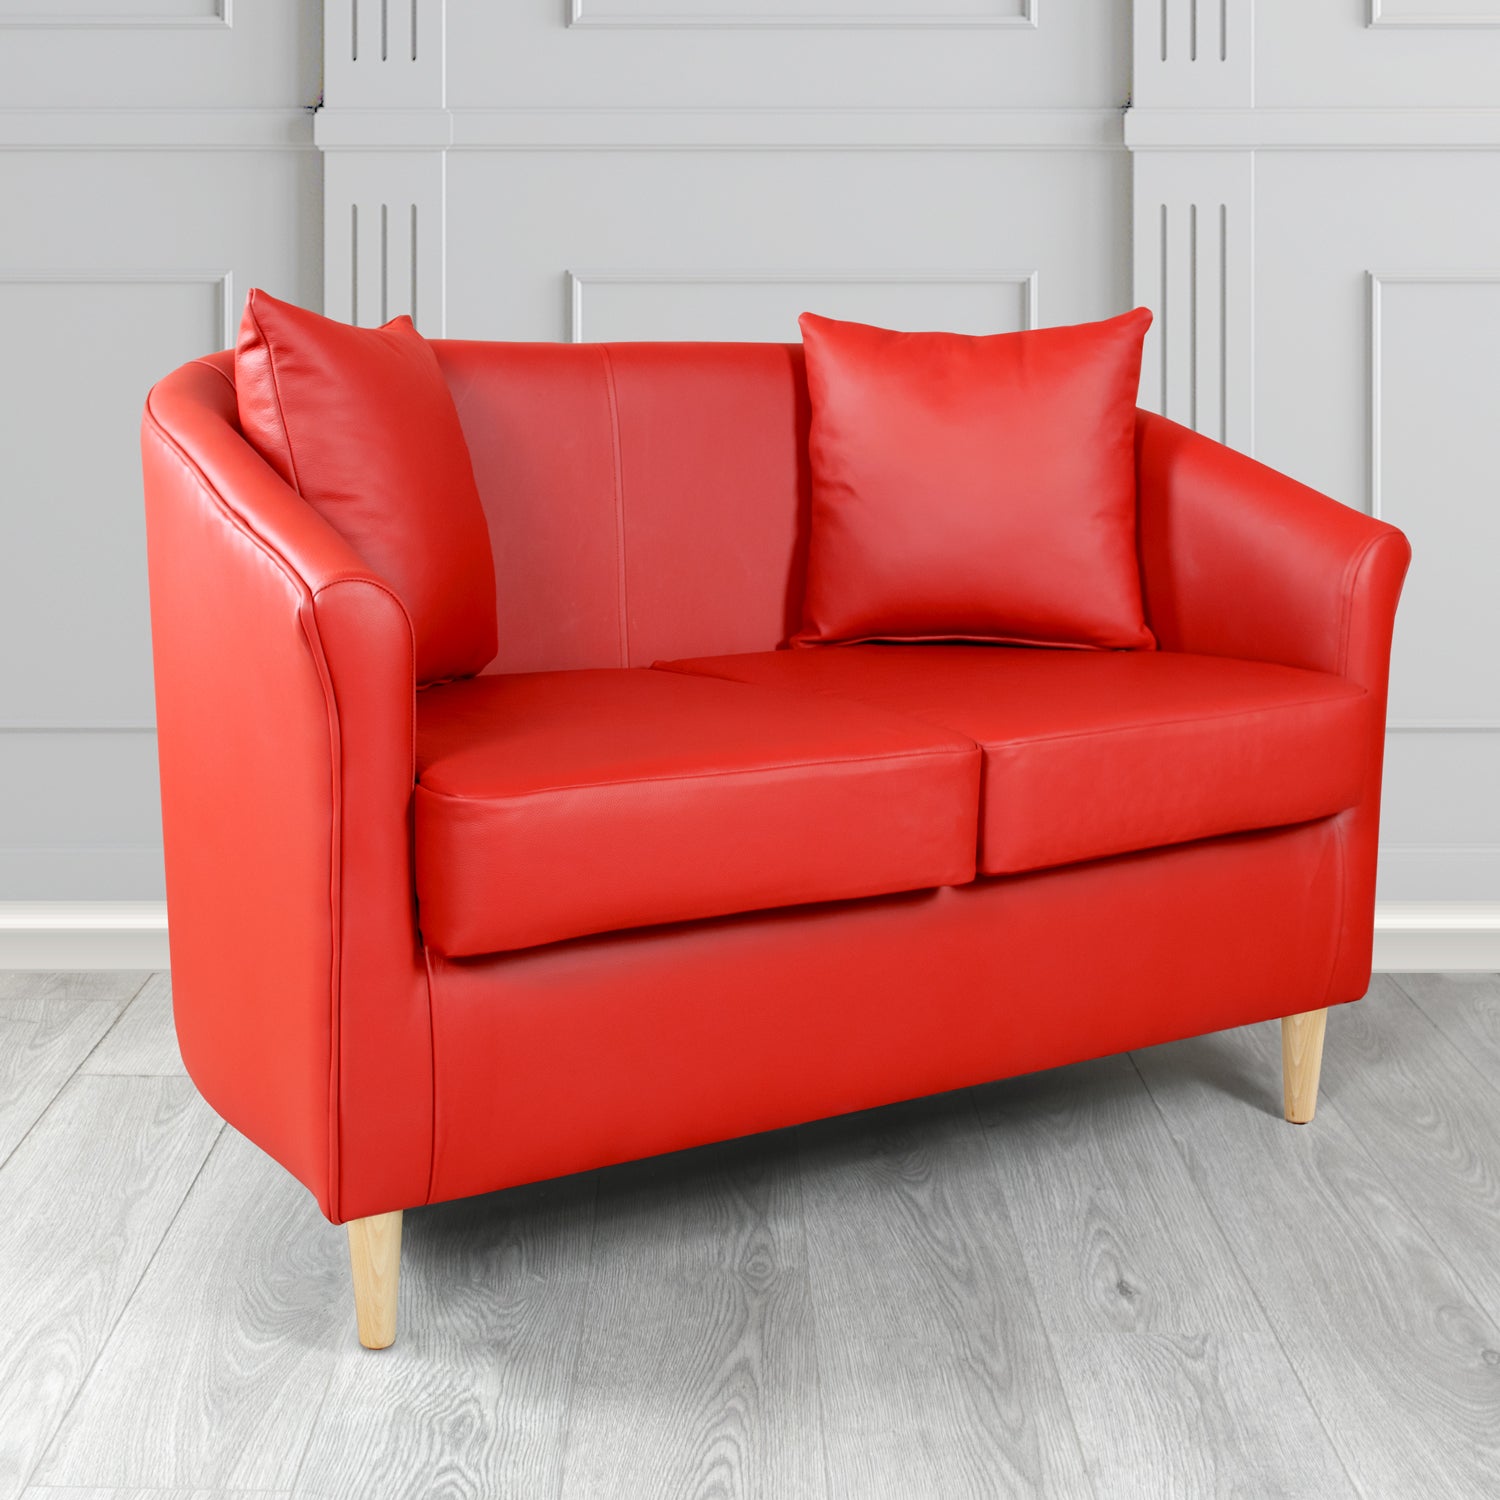 St Tropez 2 Seater Tub Sofa in Madrid Rouge Faux Leather - The Tub Chair Shop